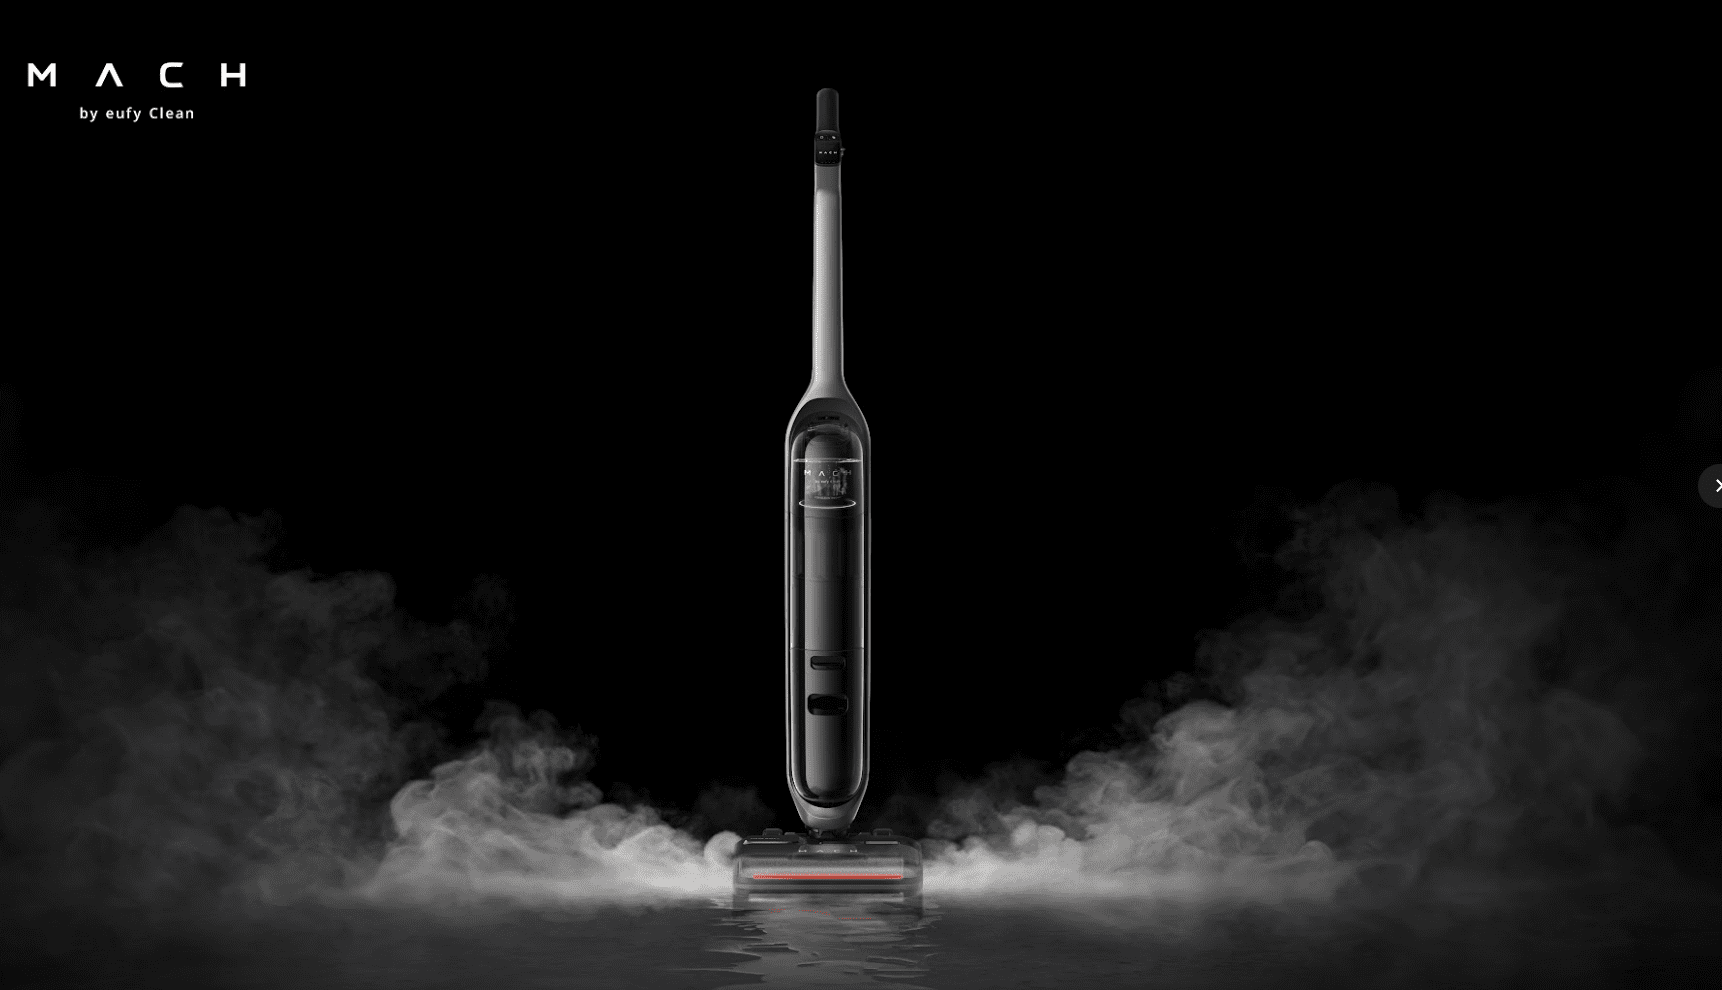 The world’s first cordless vacuum cleaner + steam mop is finally here!